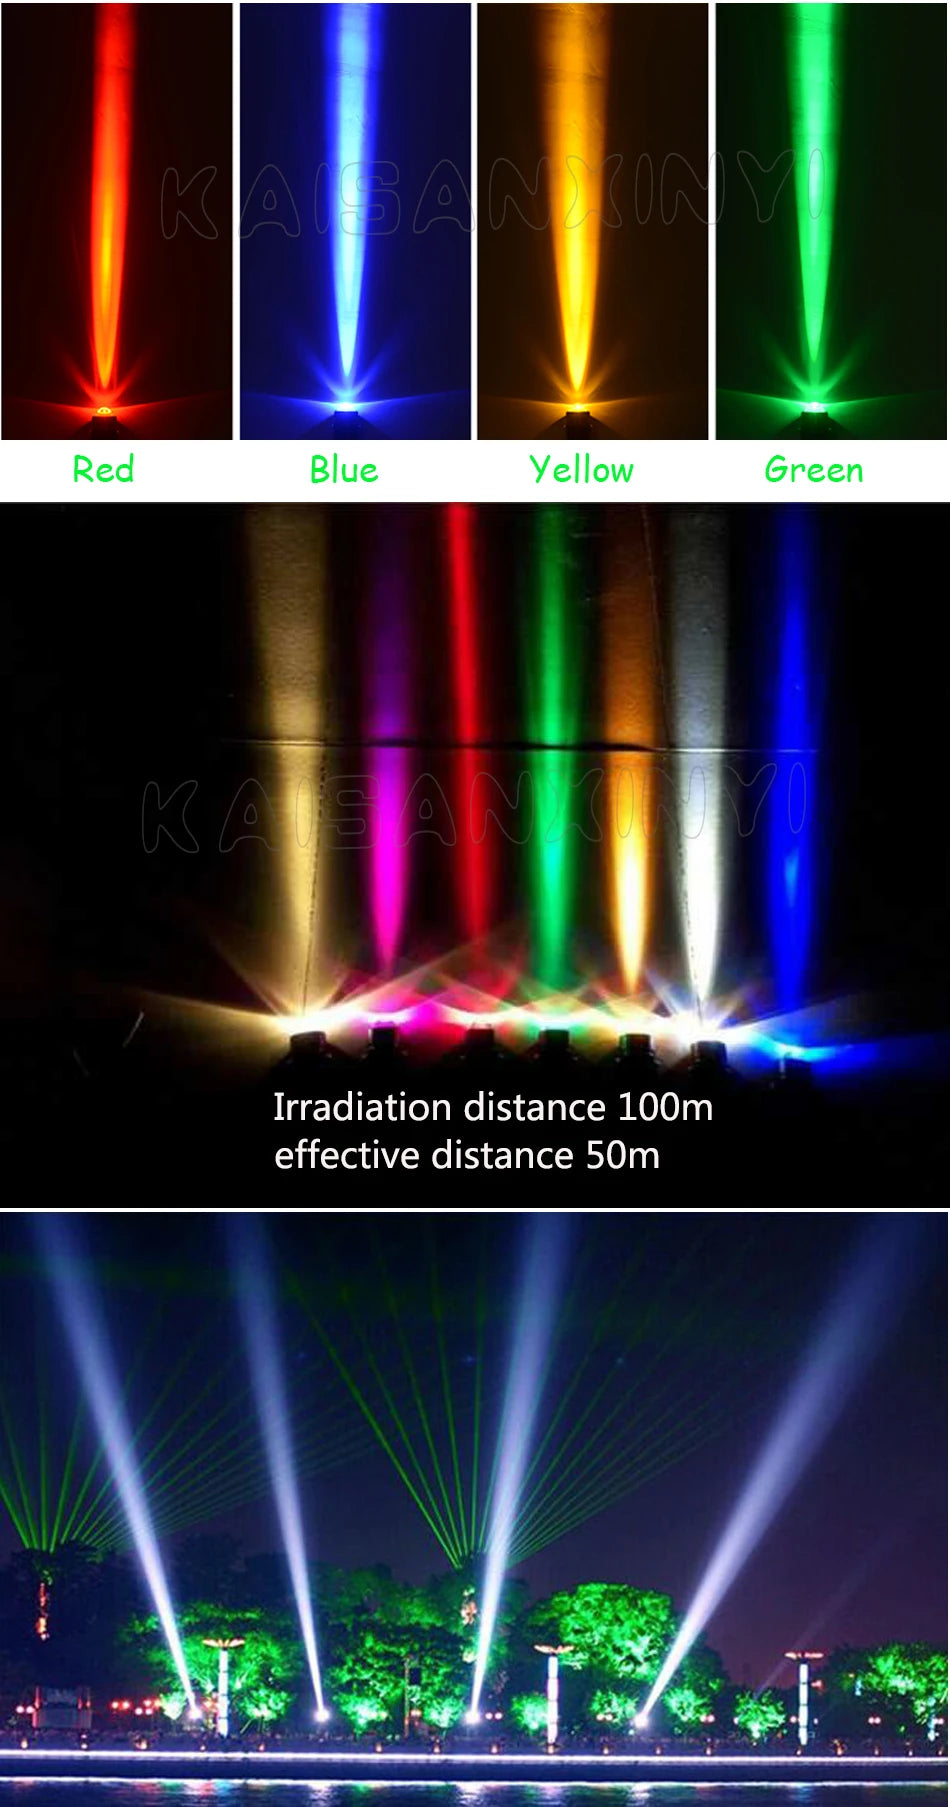 Waterproof LED lawn light with focused beam for outdoor use up to 100m.